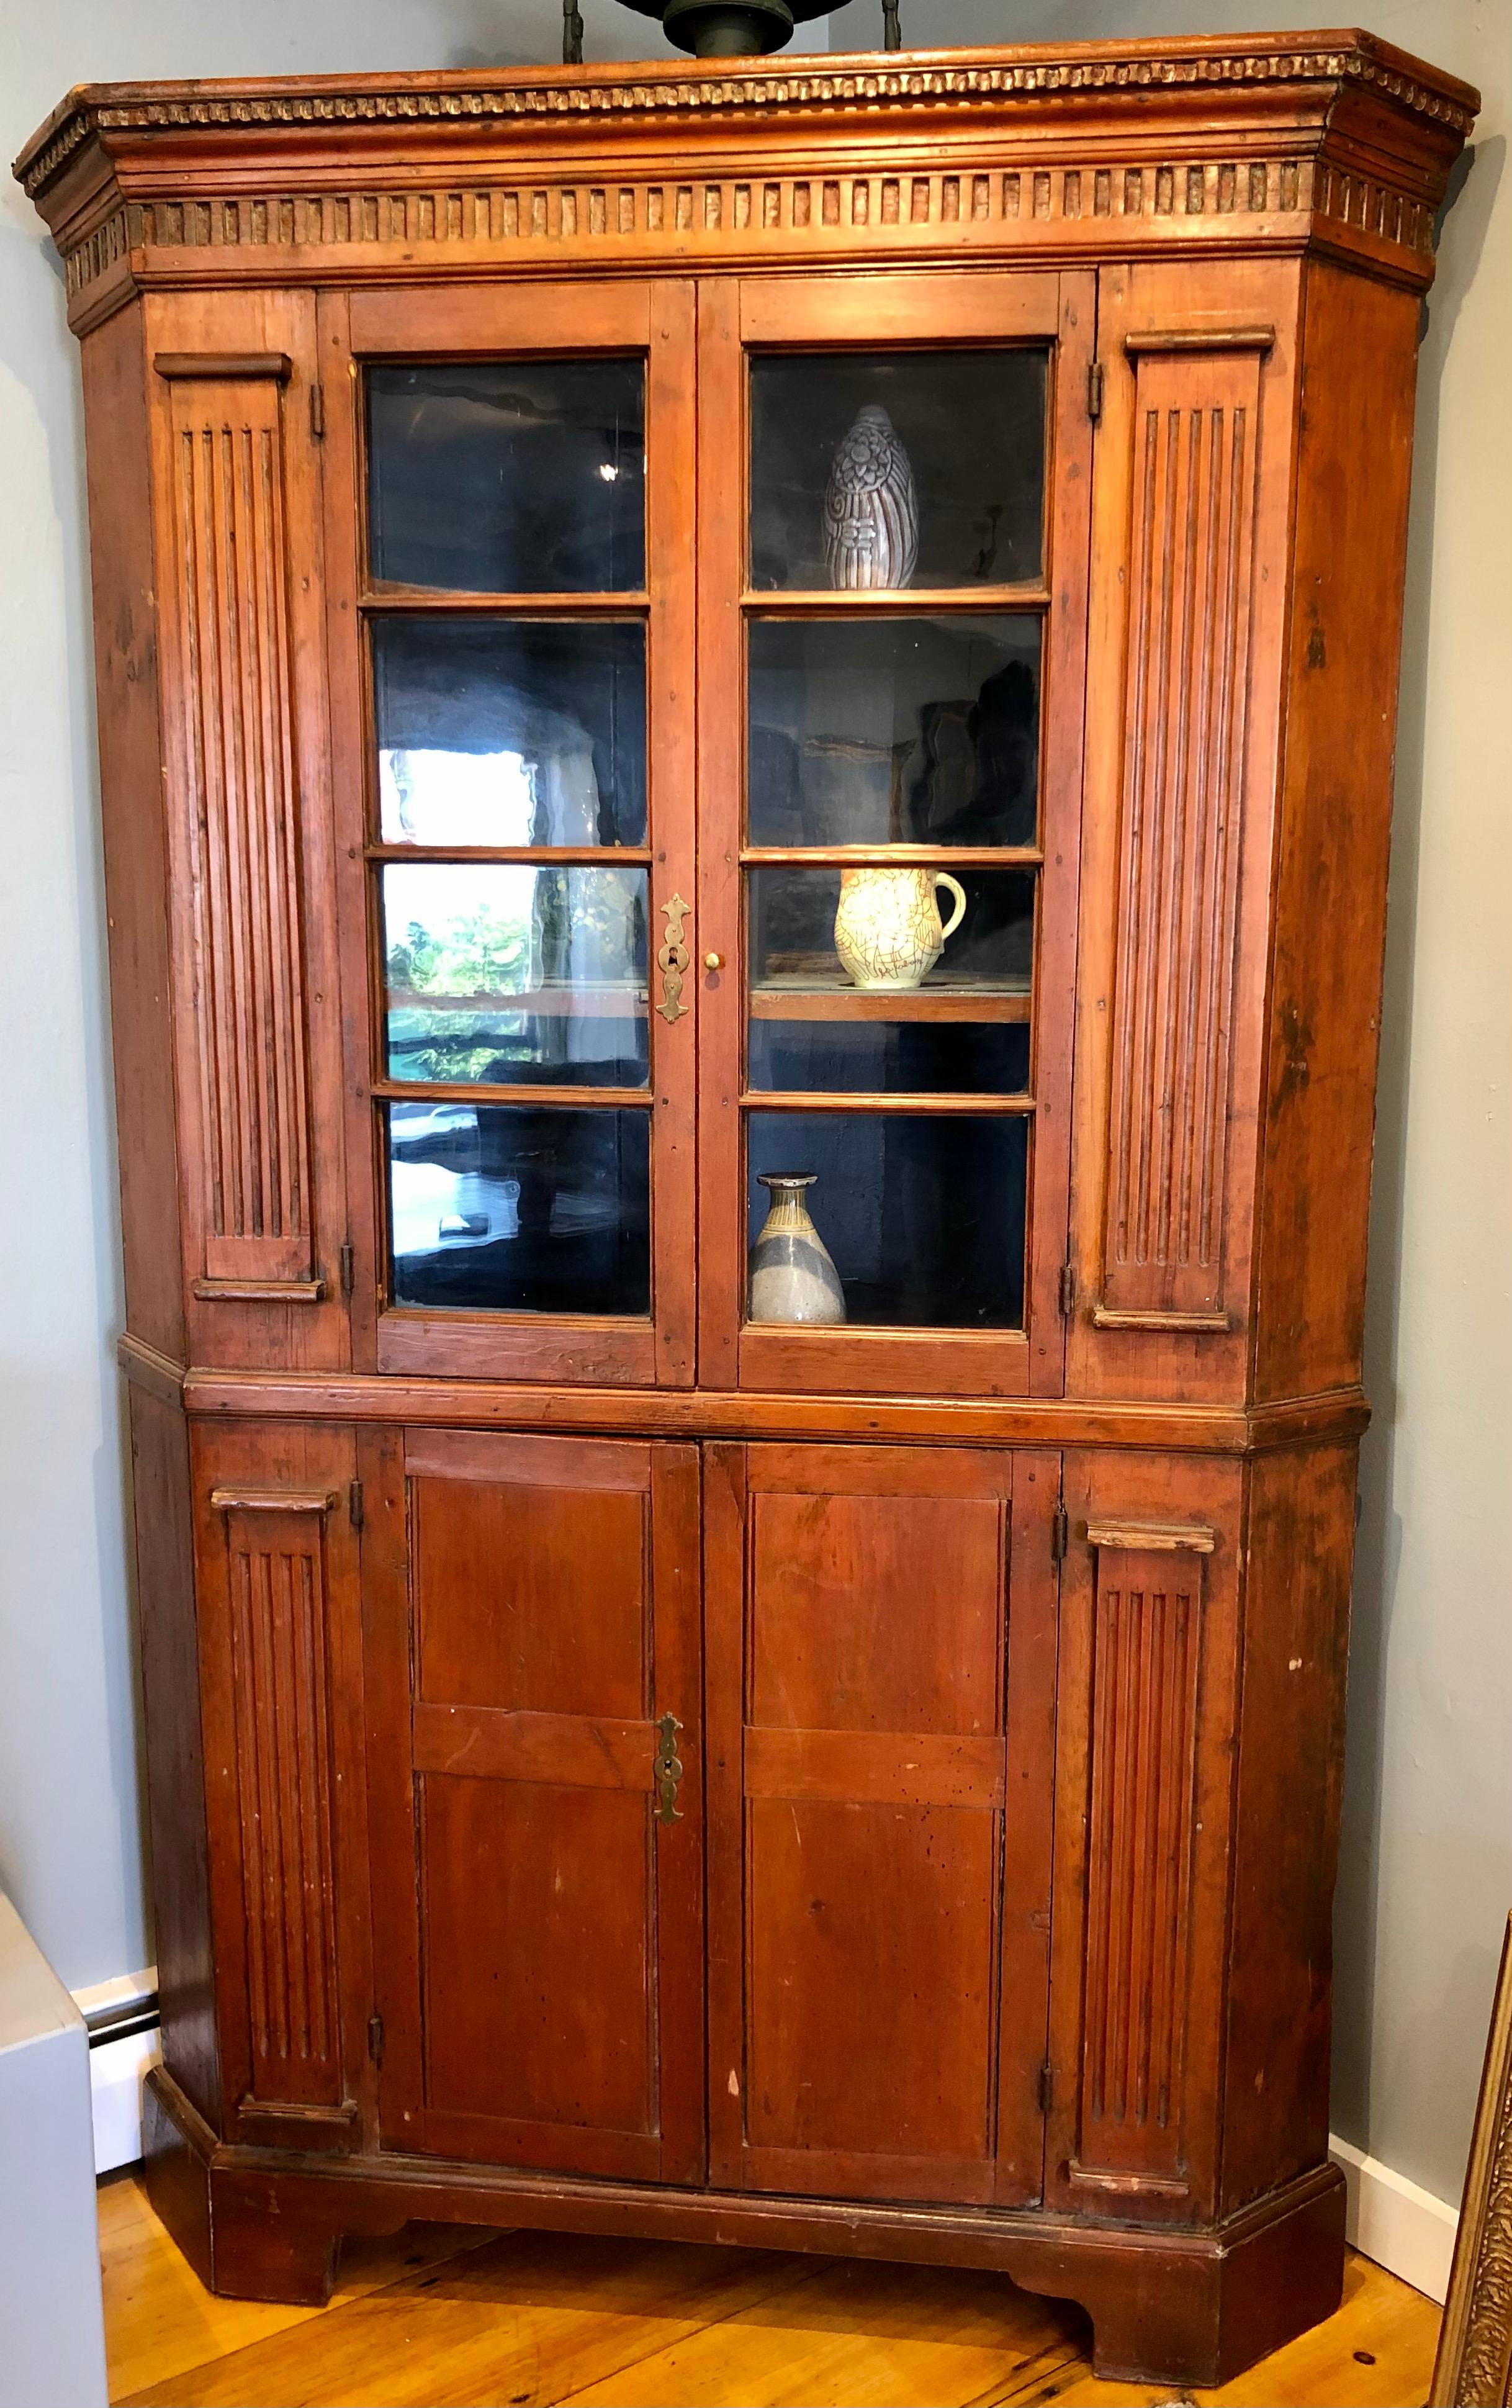 Late 18th century with fluted columns, rose head nails, and carved frieze. Pine back boards and either pine or cherry front. New England, most likely New Jersey or Pennsylvania. A very sturdy piece in. great condition for its age.